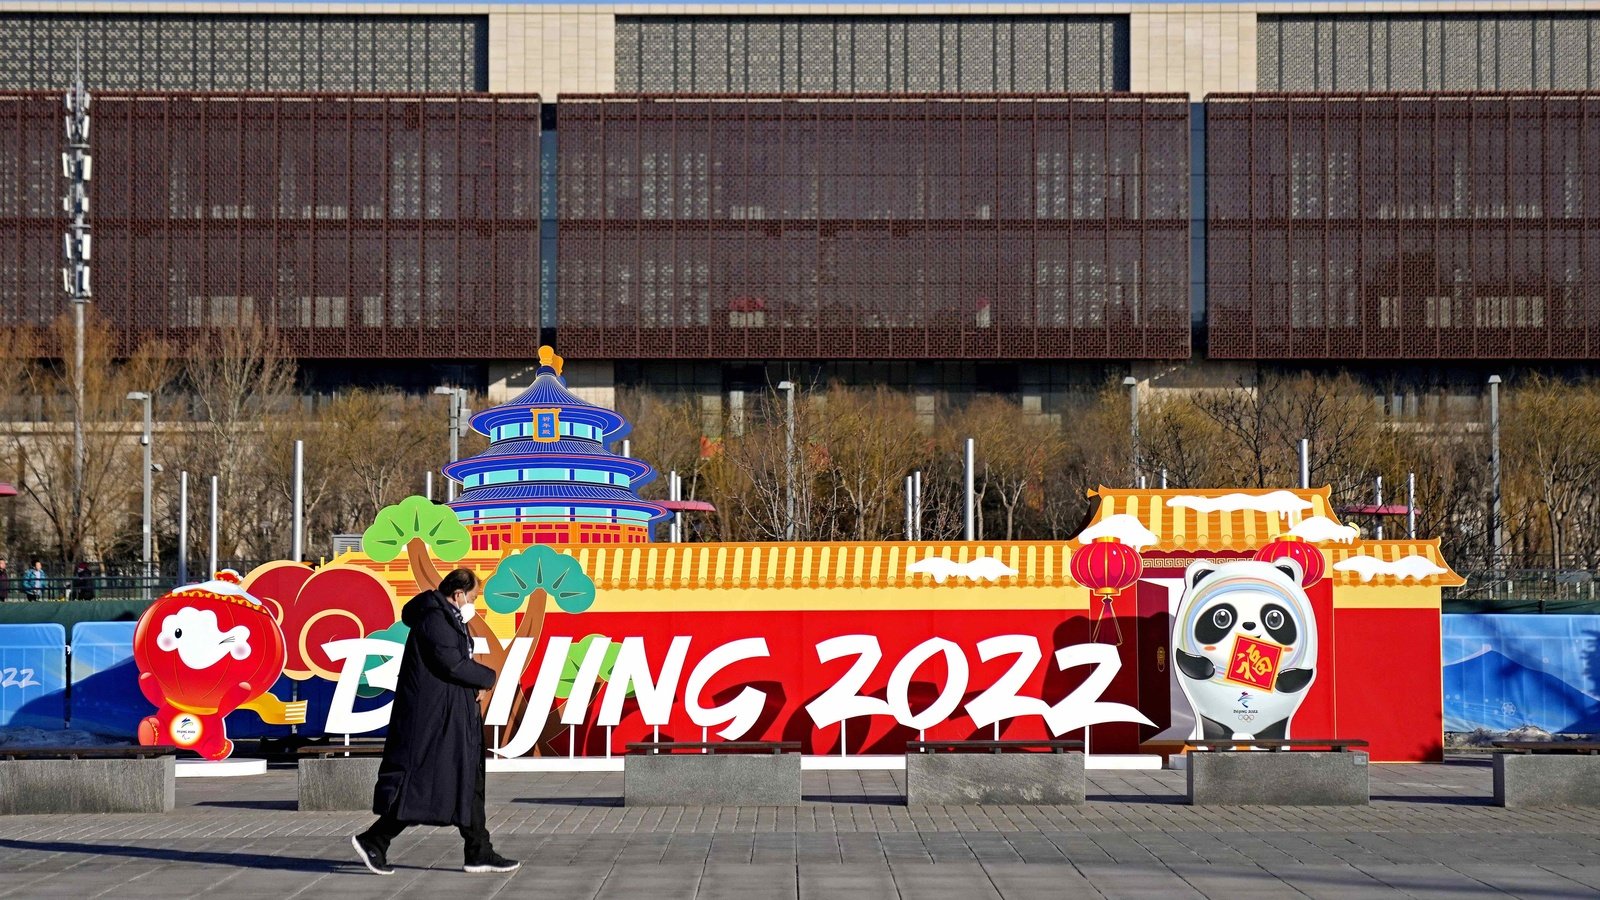 Confronting China over the 2022 Beijing Winter Olympics